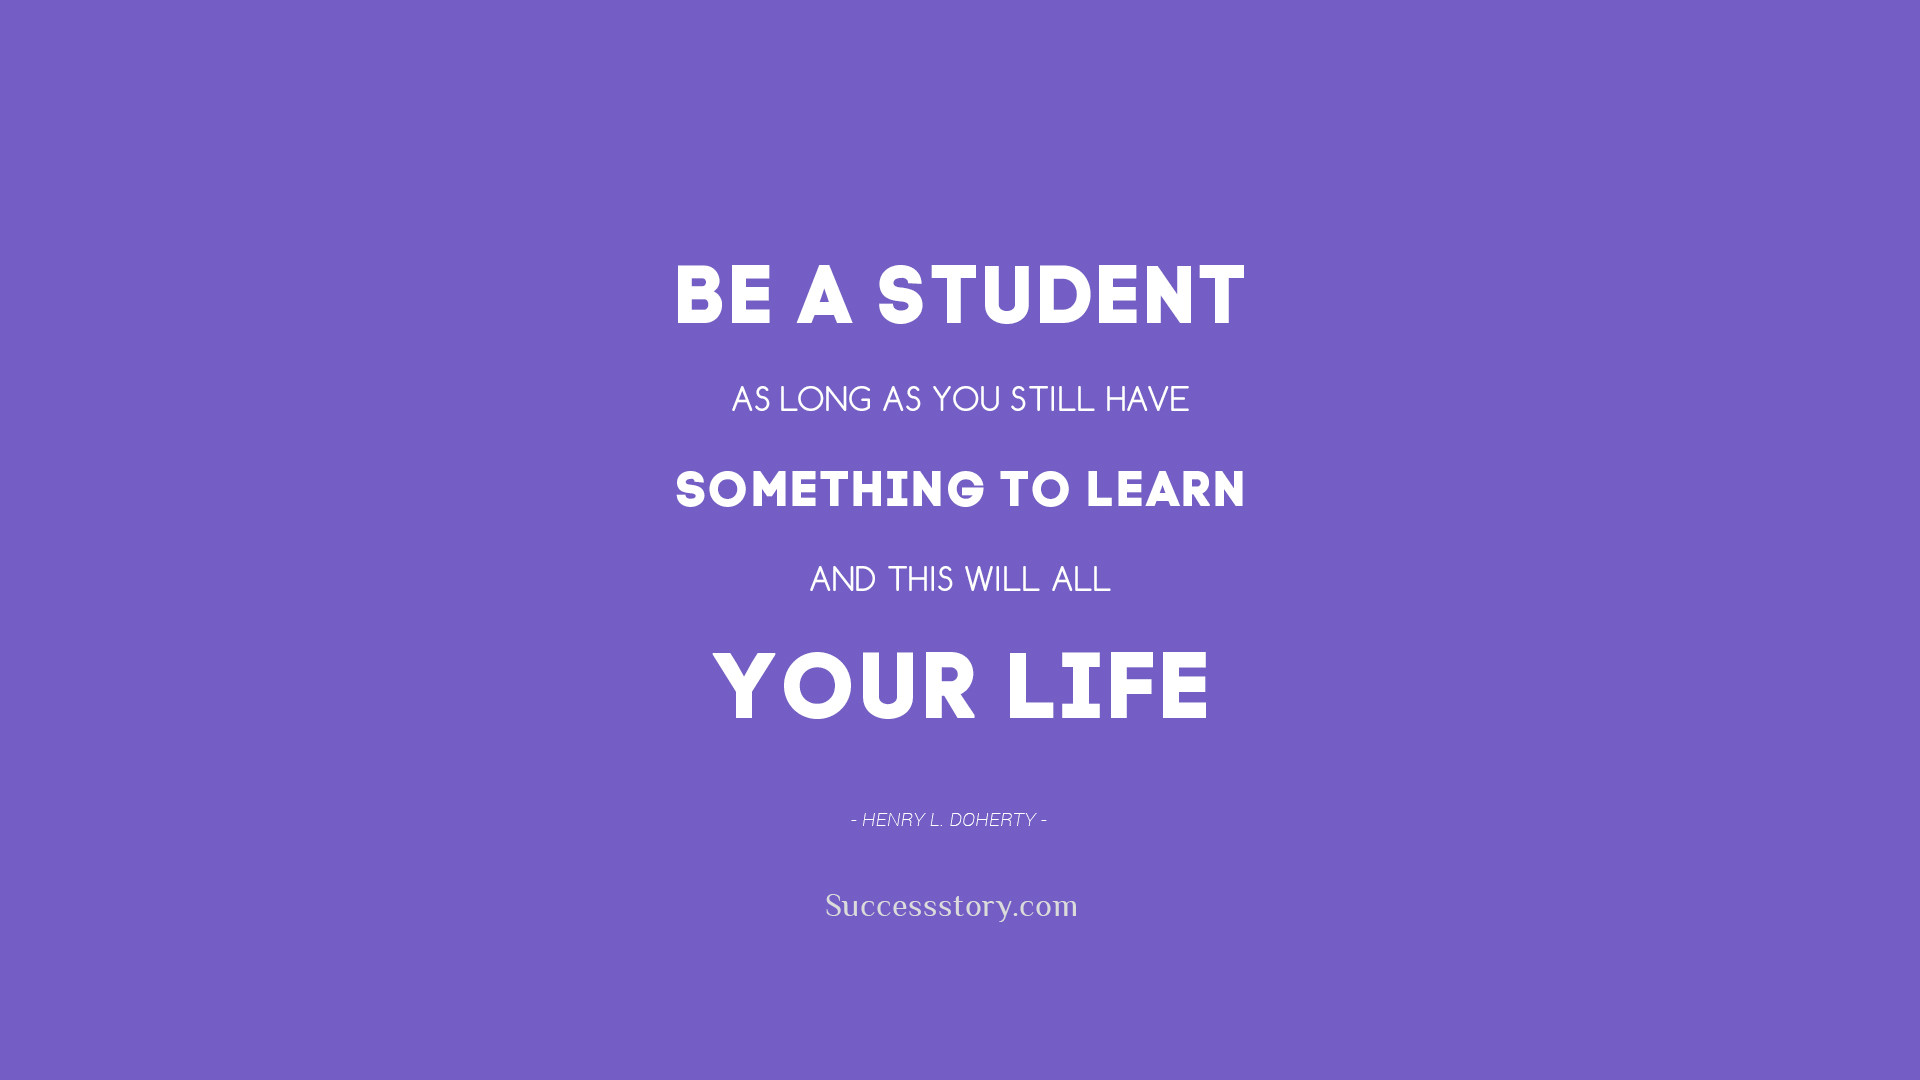 Inspirational Quote For Students
 Inspirational Quotes For Student Success QuotesGram